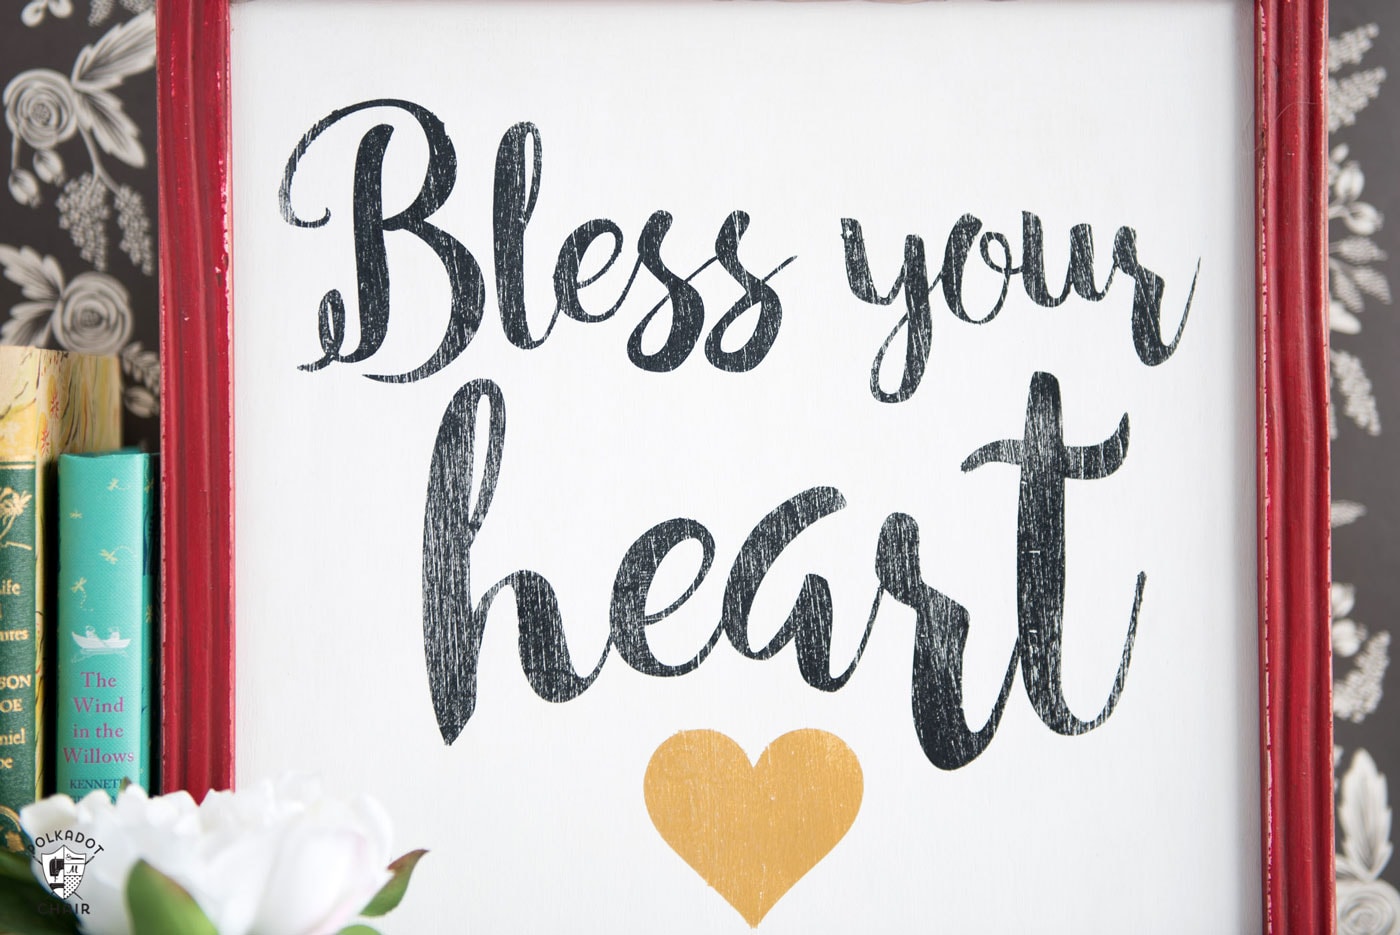 How to make a hand painted wood sign- This "Bless your Heart" sign is such a cute craft idea for Valentine's Day or for everyday!